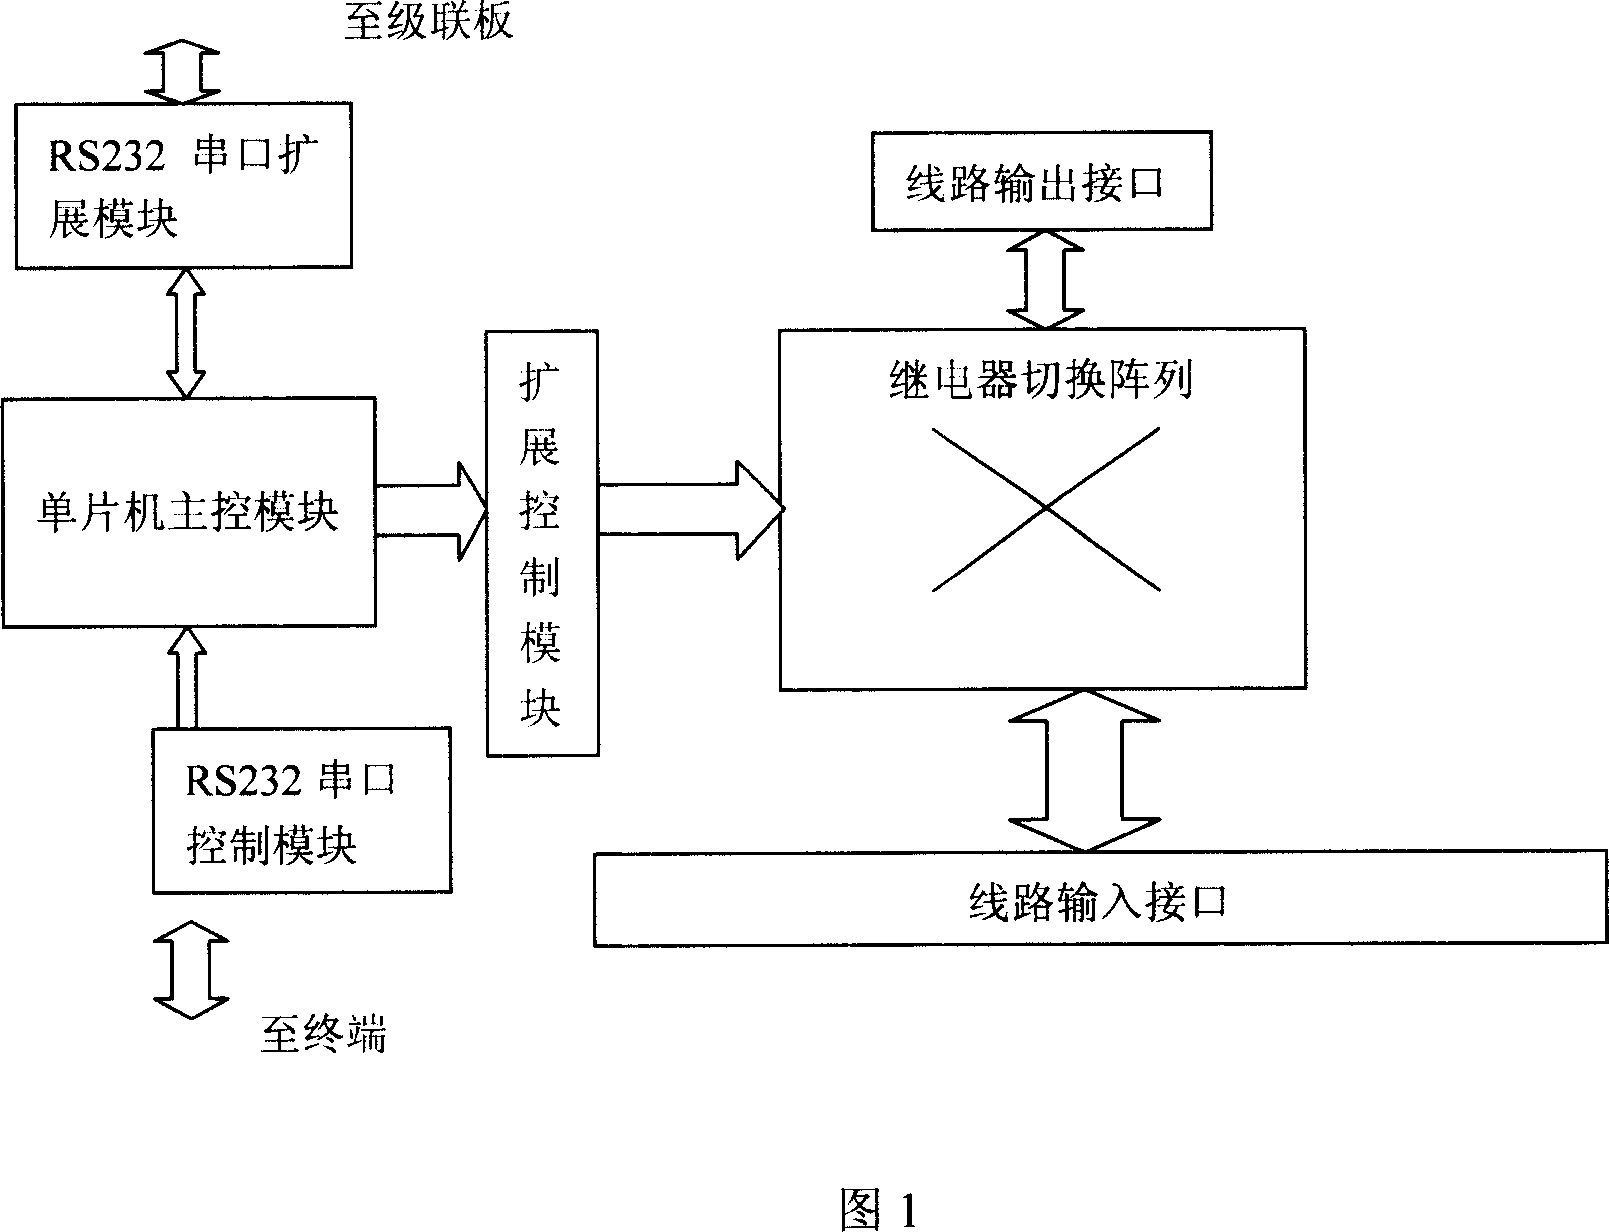 Automatic line switching device for DSL device test